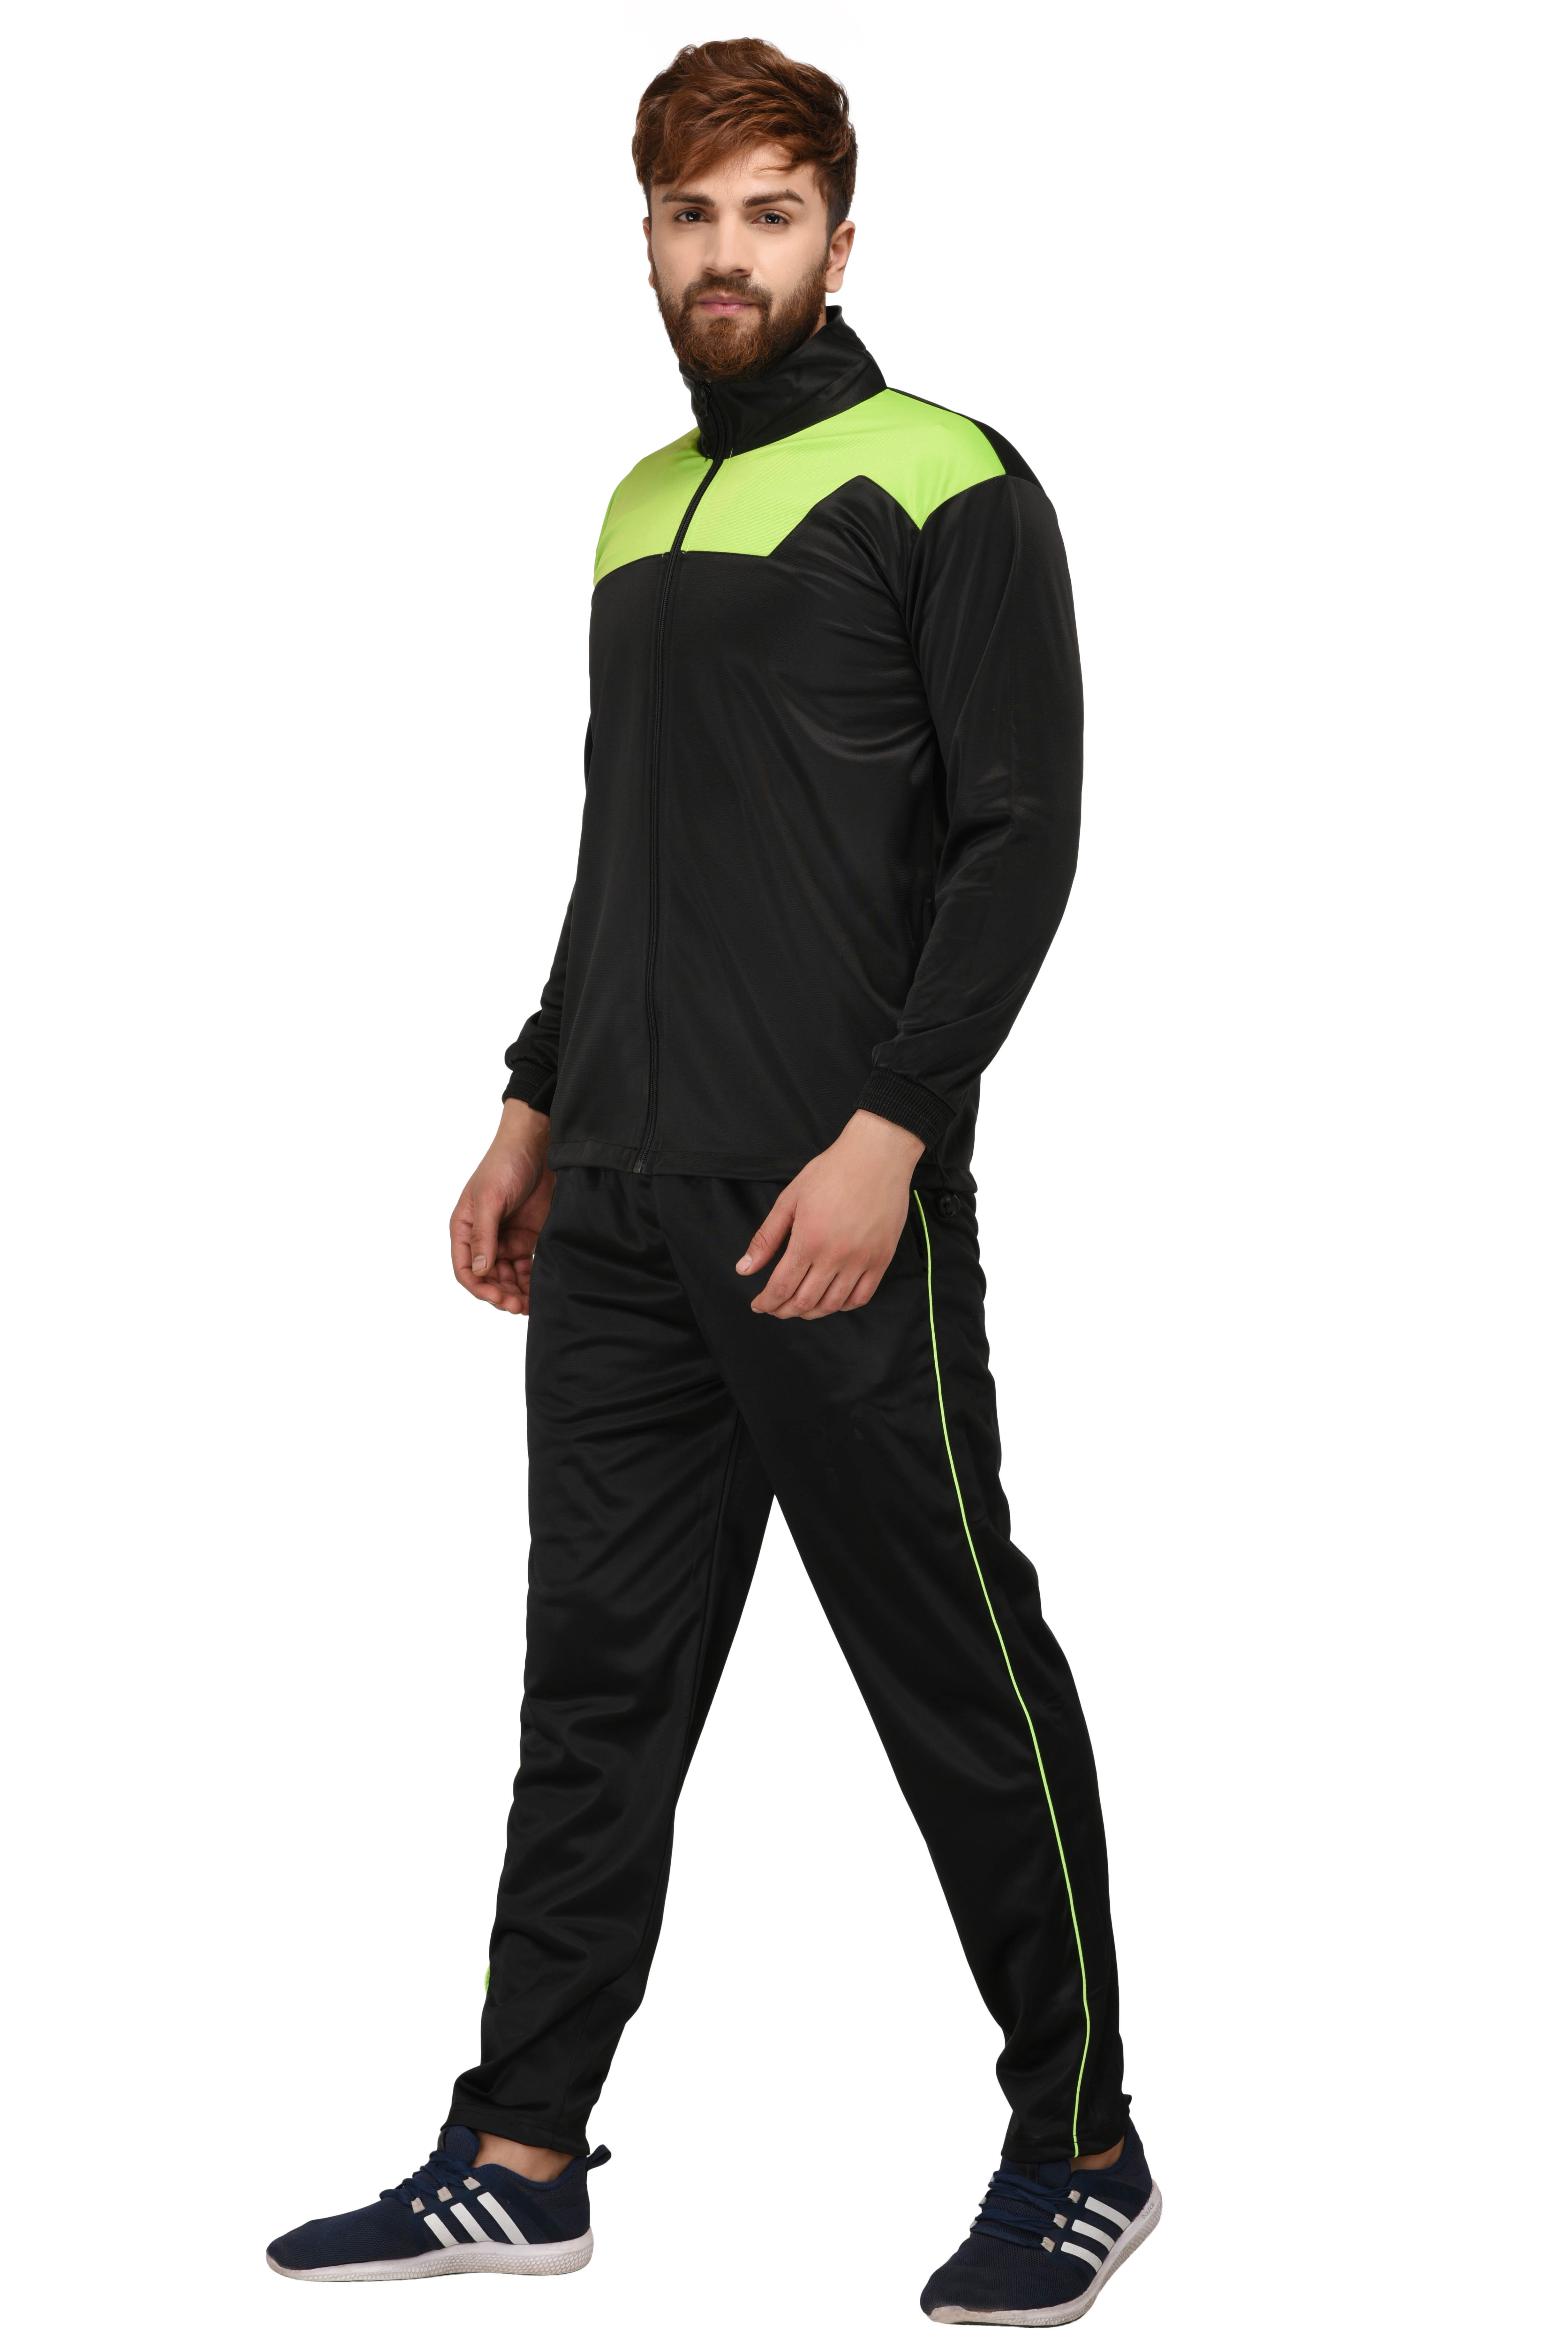 Buy Fashion 7 Men's Polyster Multicolor Track Suit Online @ ₹685 from ...